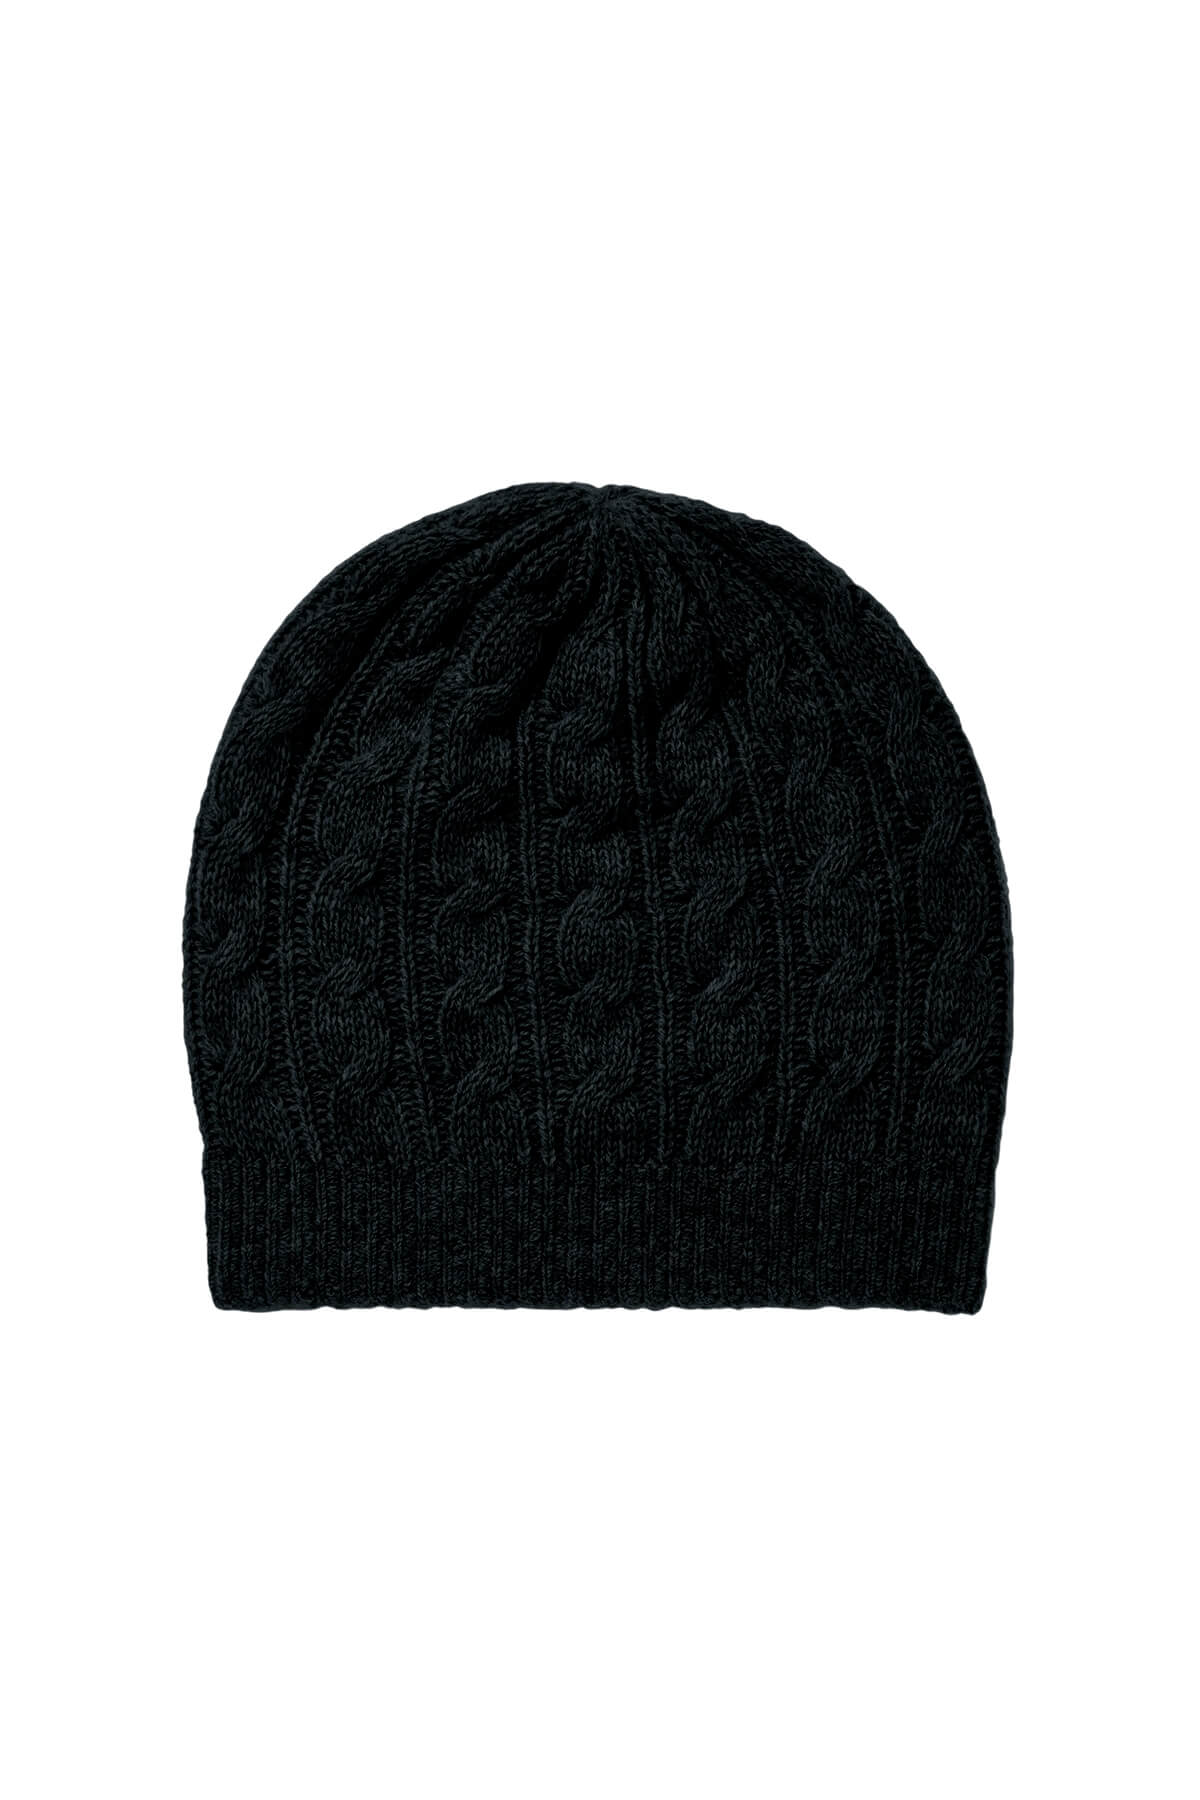 Johnstons of Elgin’s Black Gauzy Cable Cashmere Relaxed Beanie on a white background HAY03300SA0900